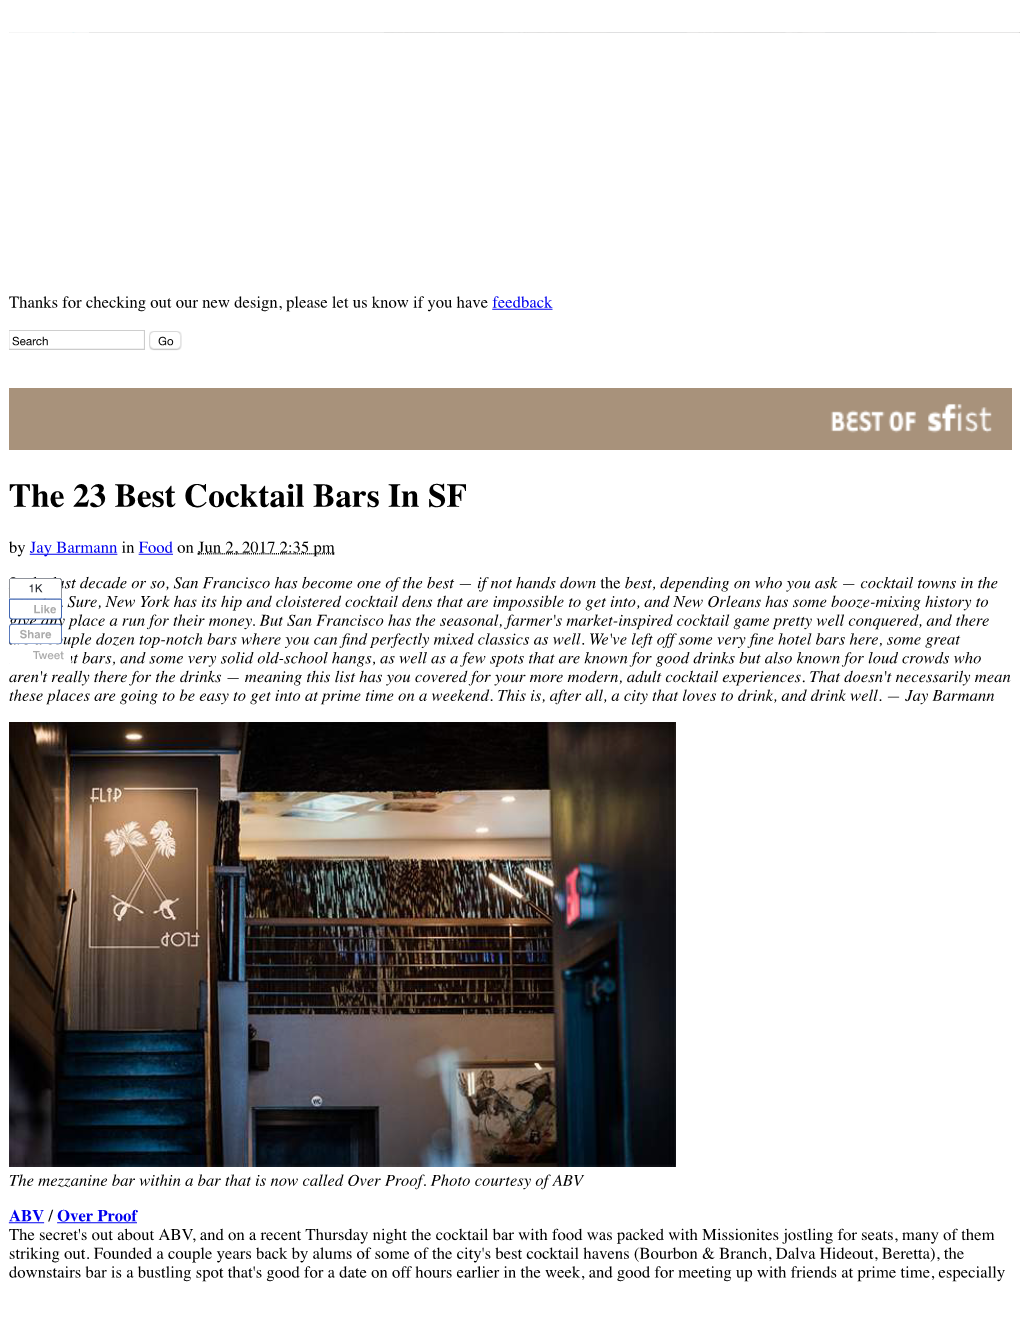 The 23 Best Cocktail Bars in SF by Jay Barmann in Food on Jun 2, 2017 2:35 Pm